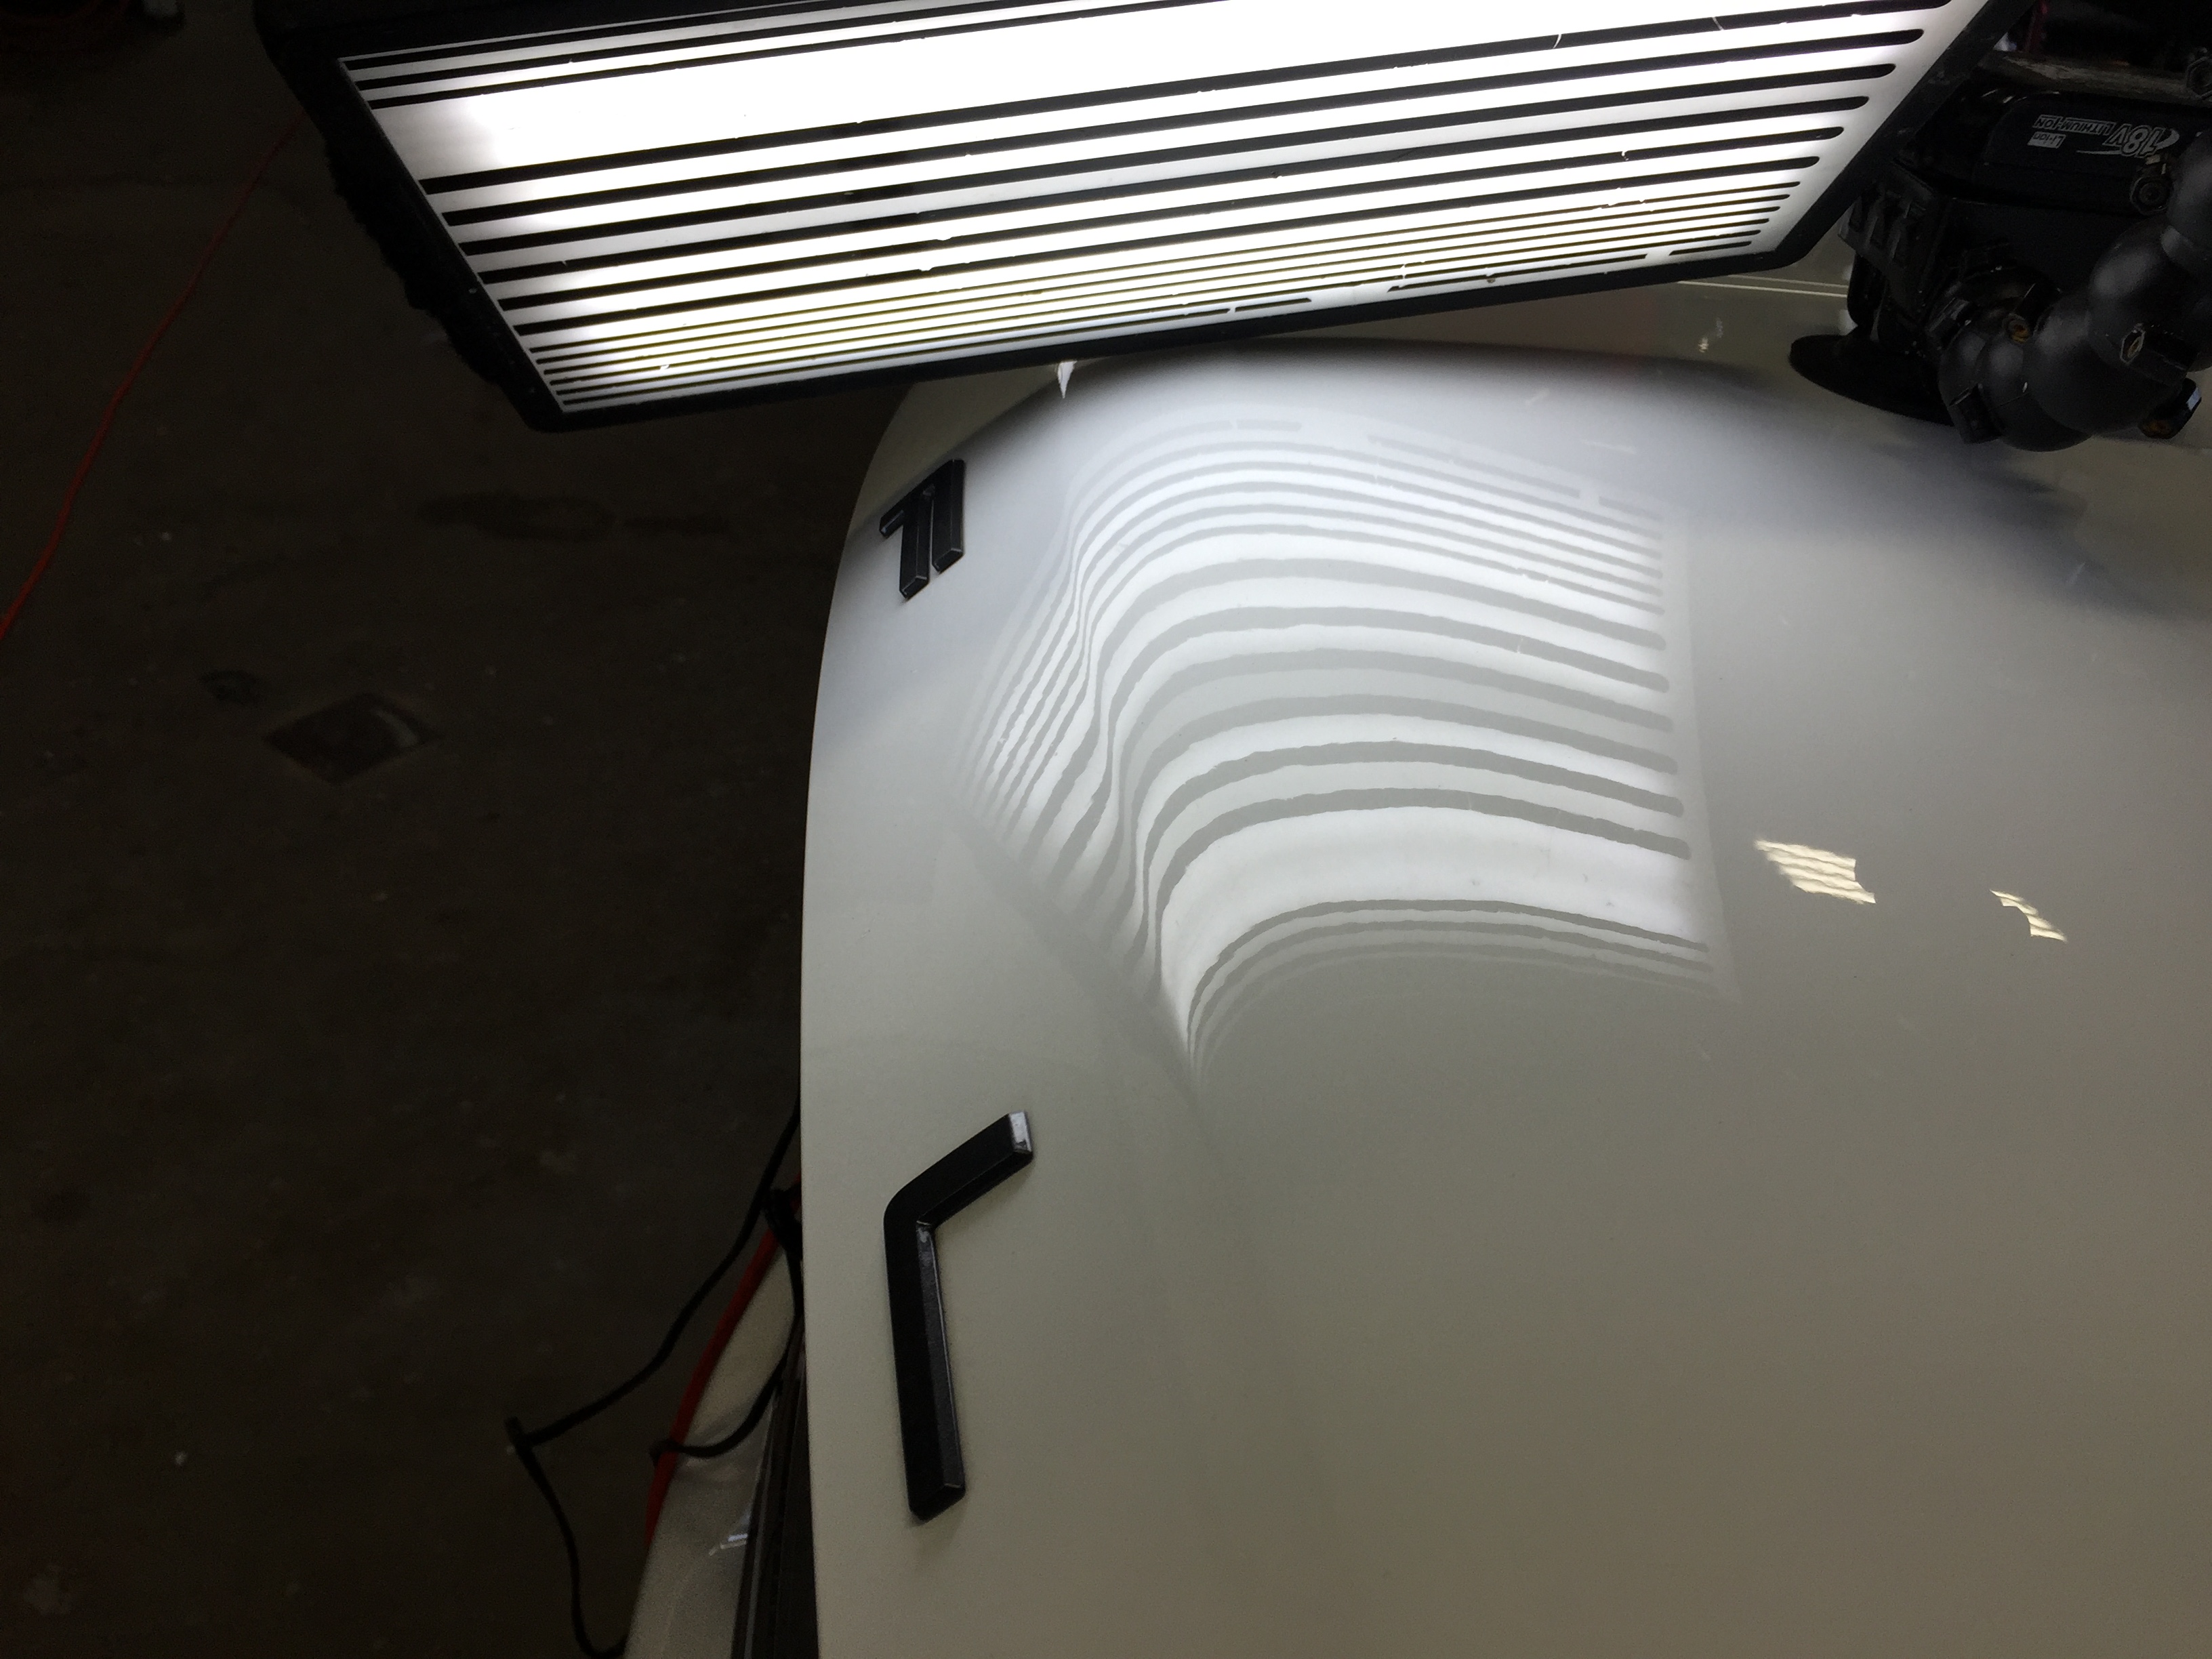 2015 Ford Flex, Paintless Dent Removal, Hood Damage, Springfield, IL. http://217dent.com